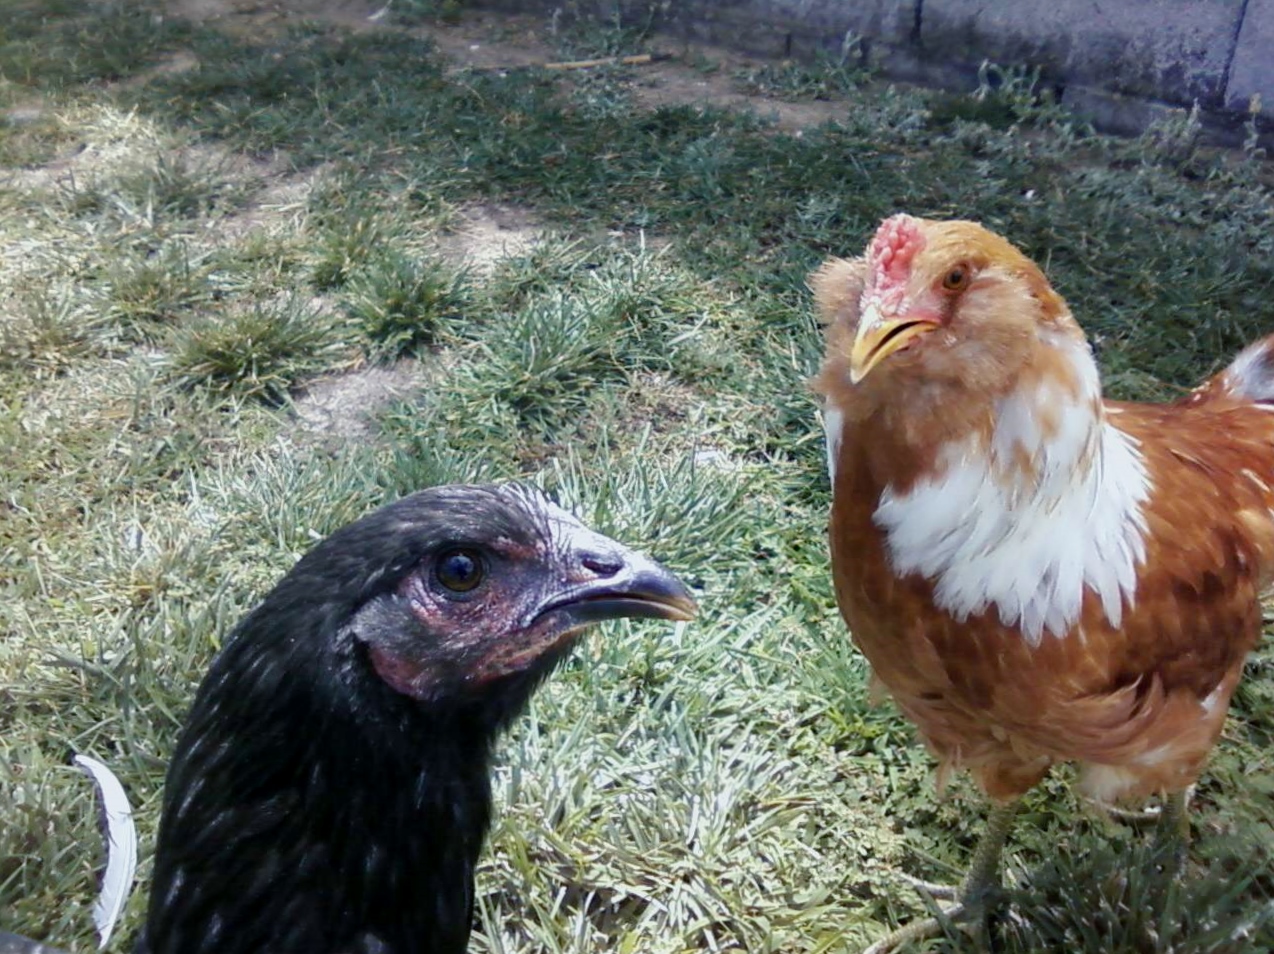 Everyone looks at Peck the black chicken (who doesn't lay eggs!) askance.